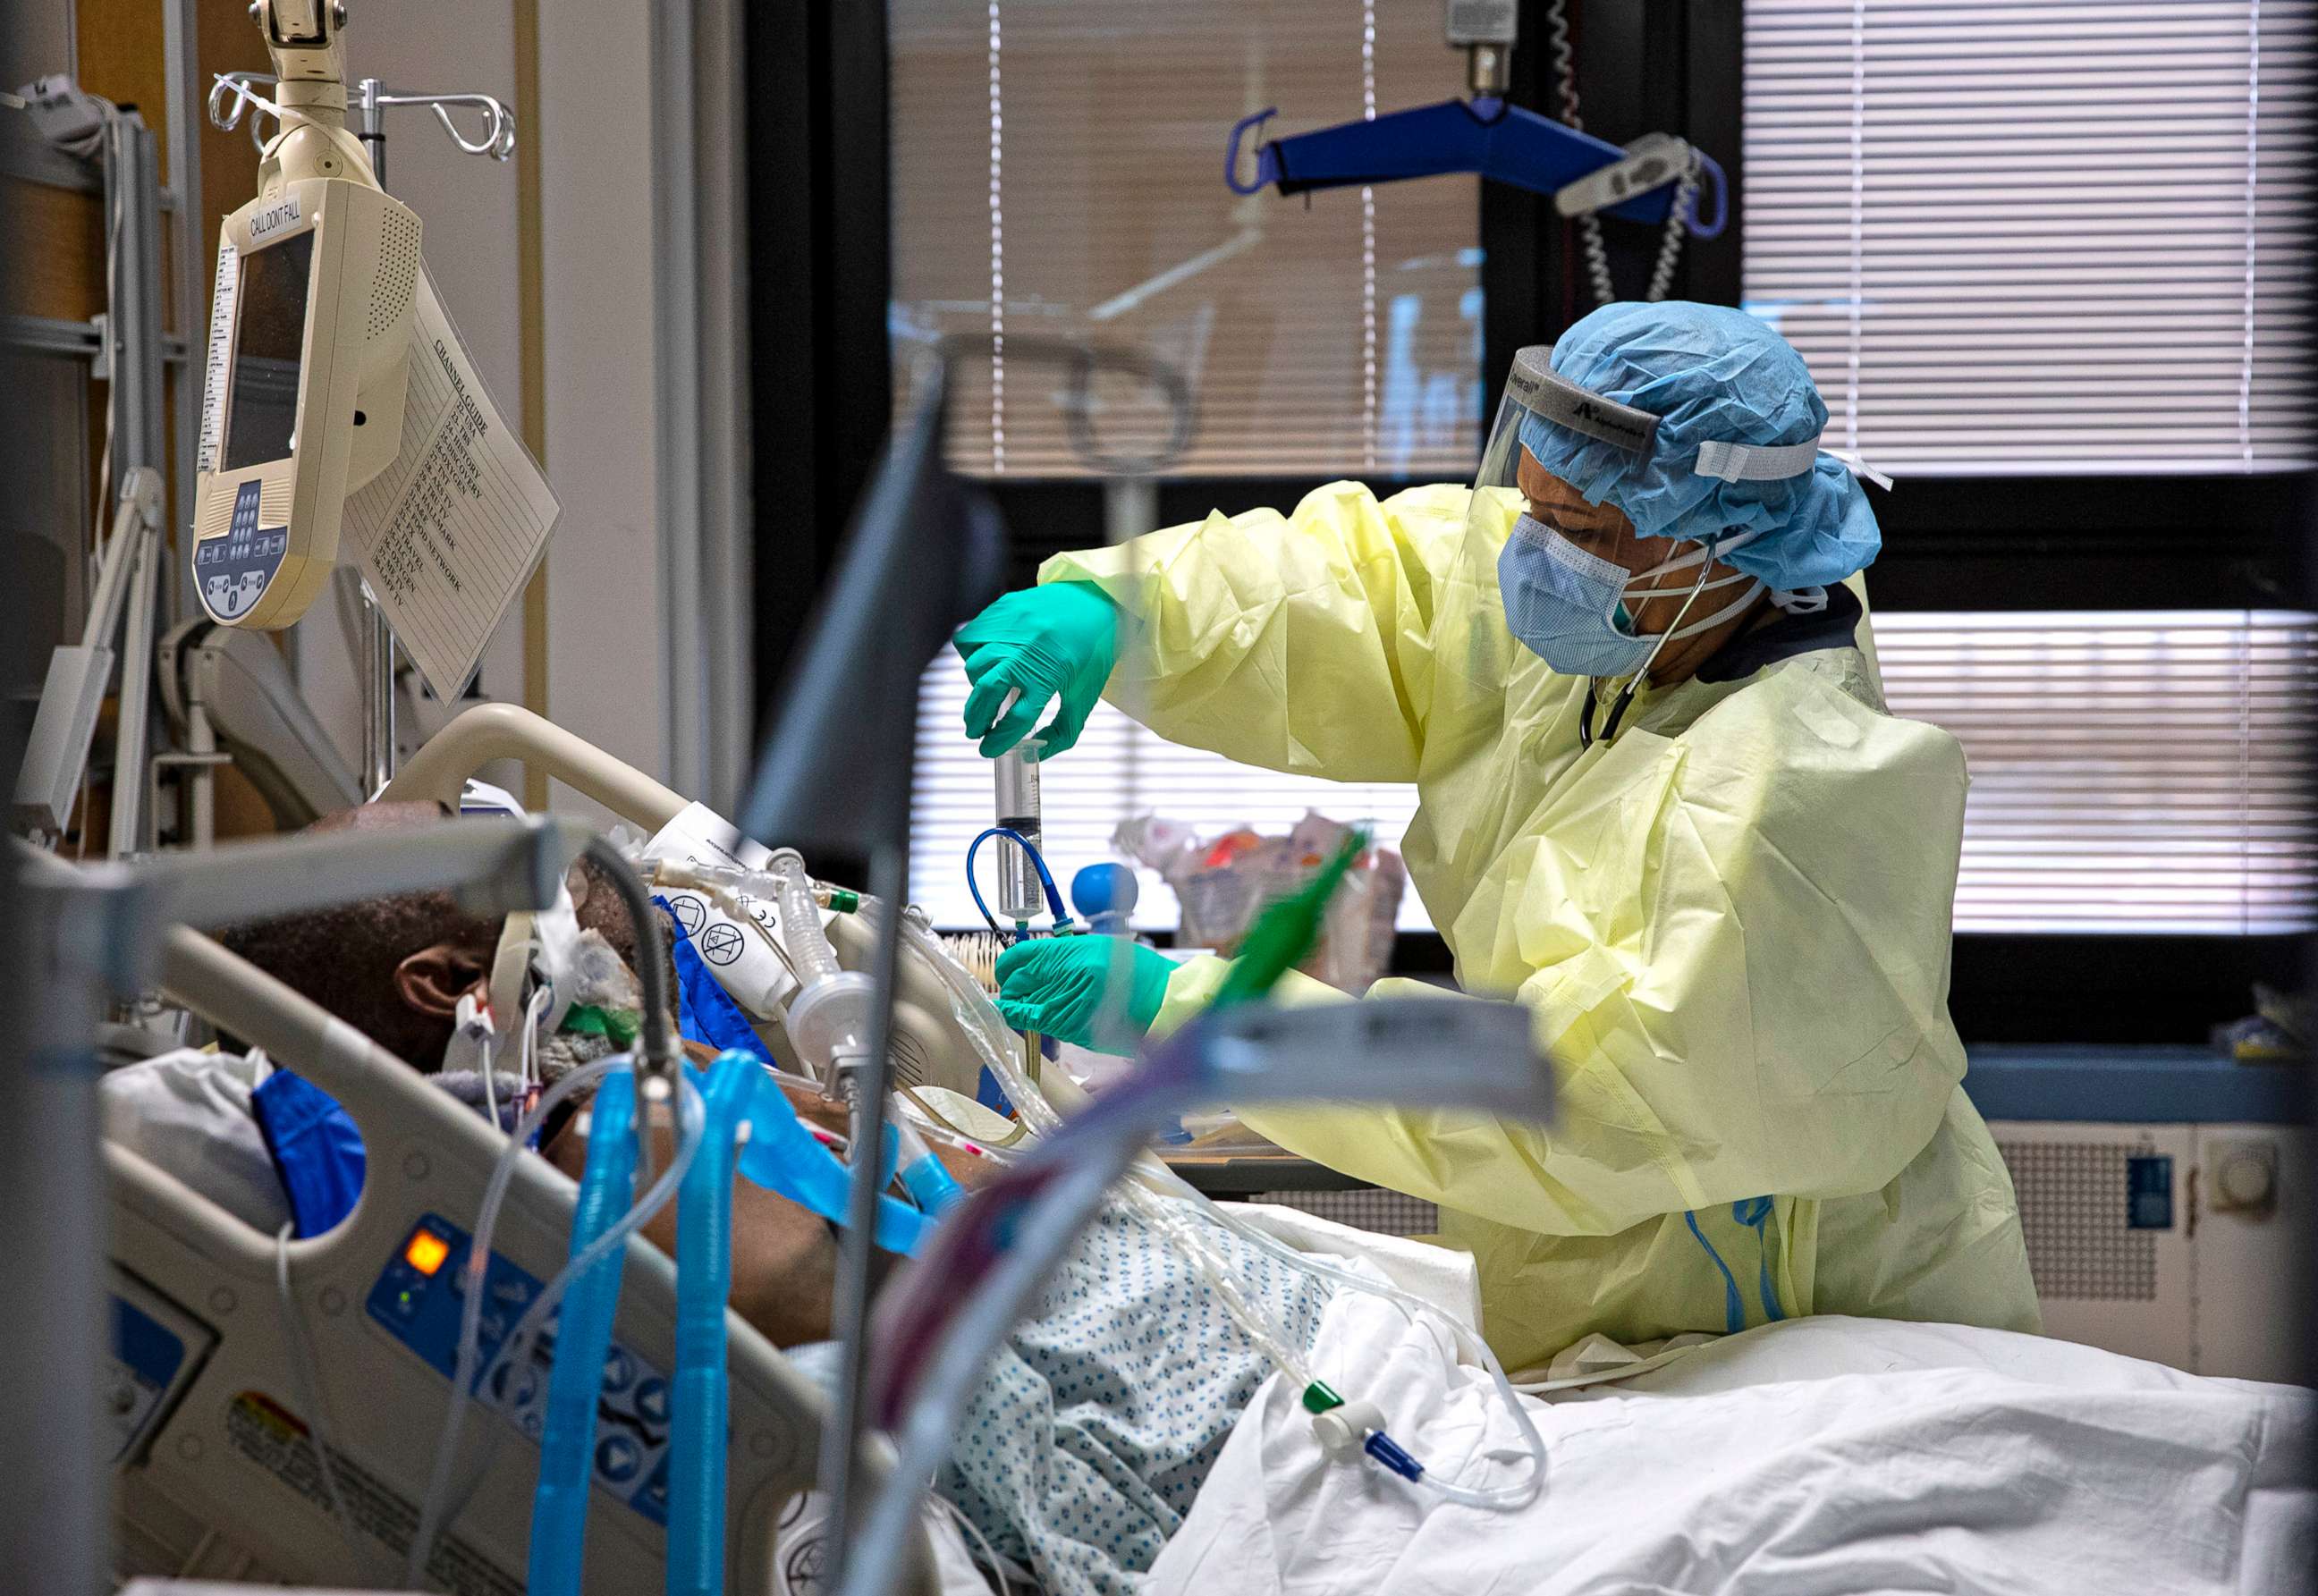 PHOTO: A nurse puts medication or water into the feeding tube of a COVID-19 patient at the Medical Intensive Care Unit floor, MICU, at the Veterans Affairs Medical Center April 24, 2020 in the Manhattan borough of New York City. 